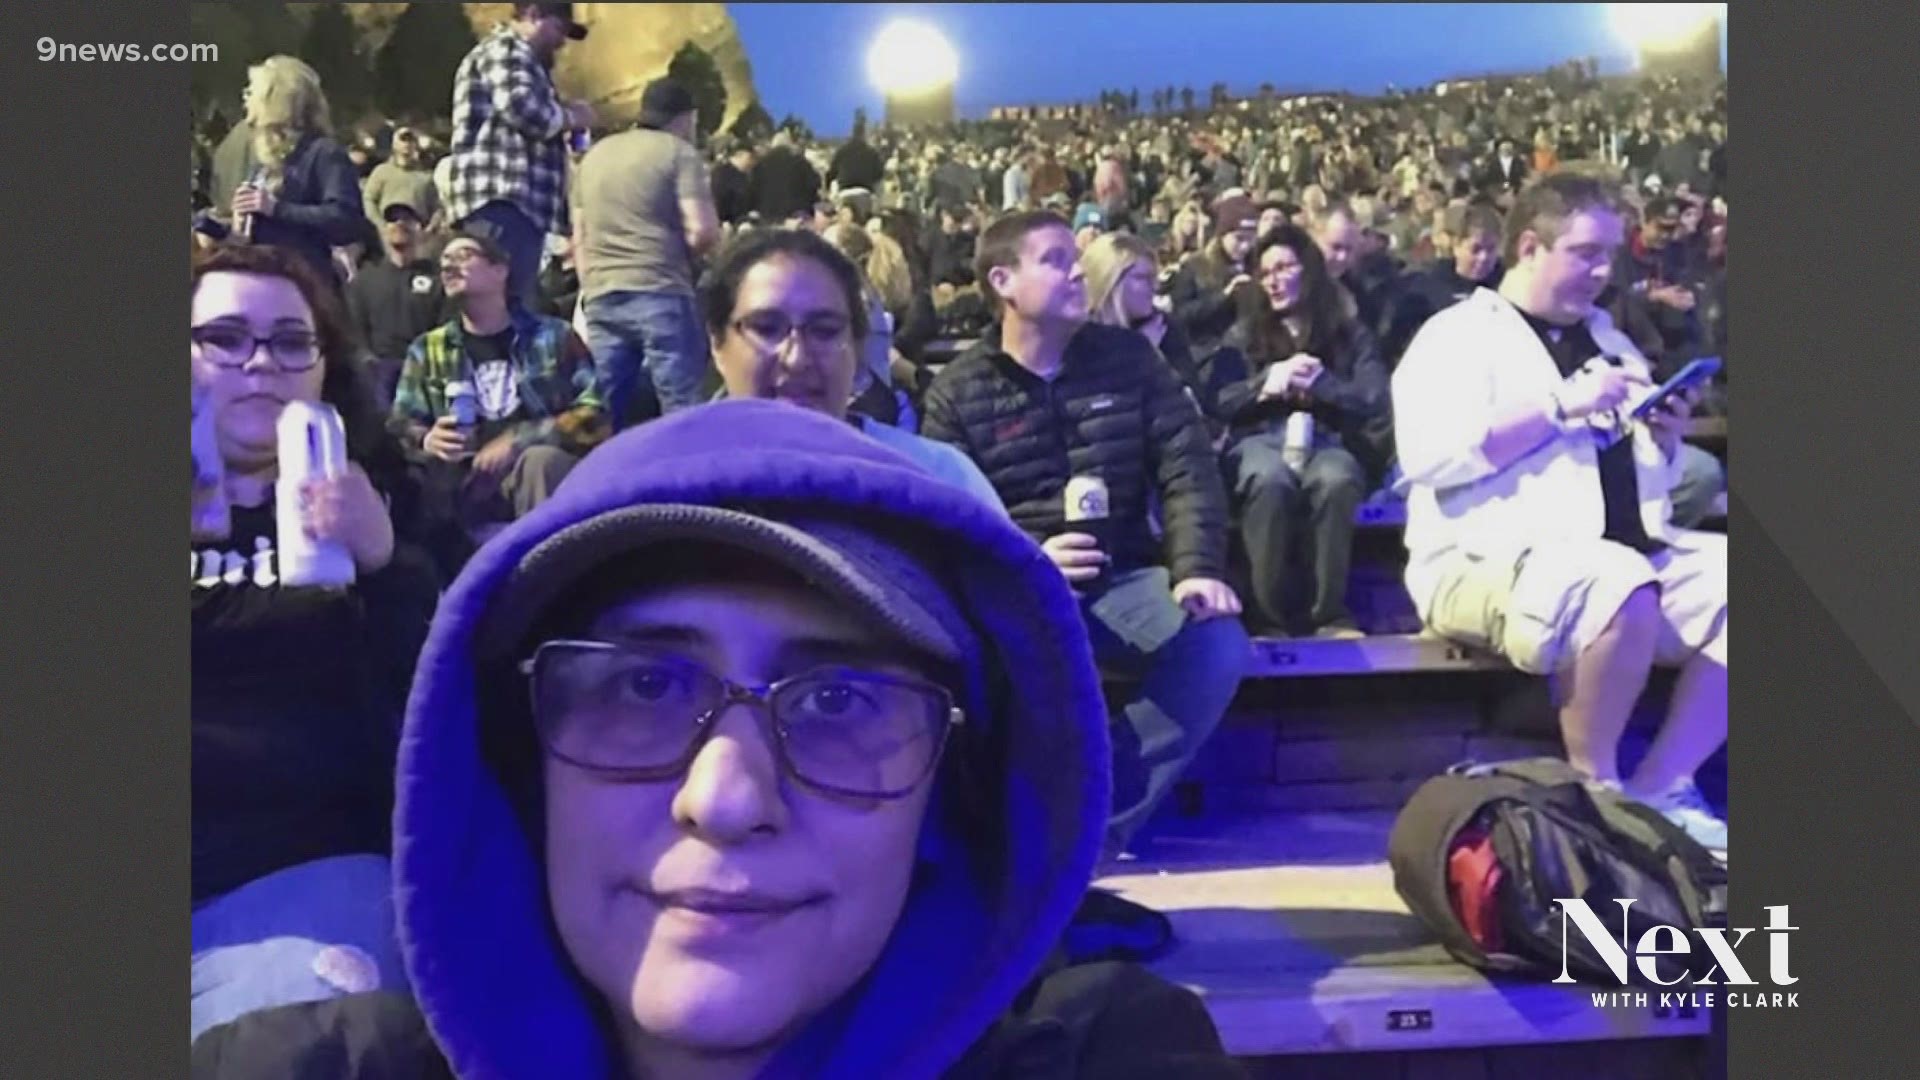 A picture of fans at Red Rocks made us wonder about when you'll feel comfortable in a crowd again. Next@9news.com.